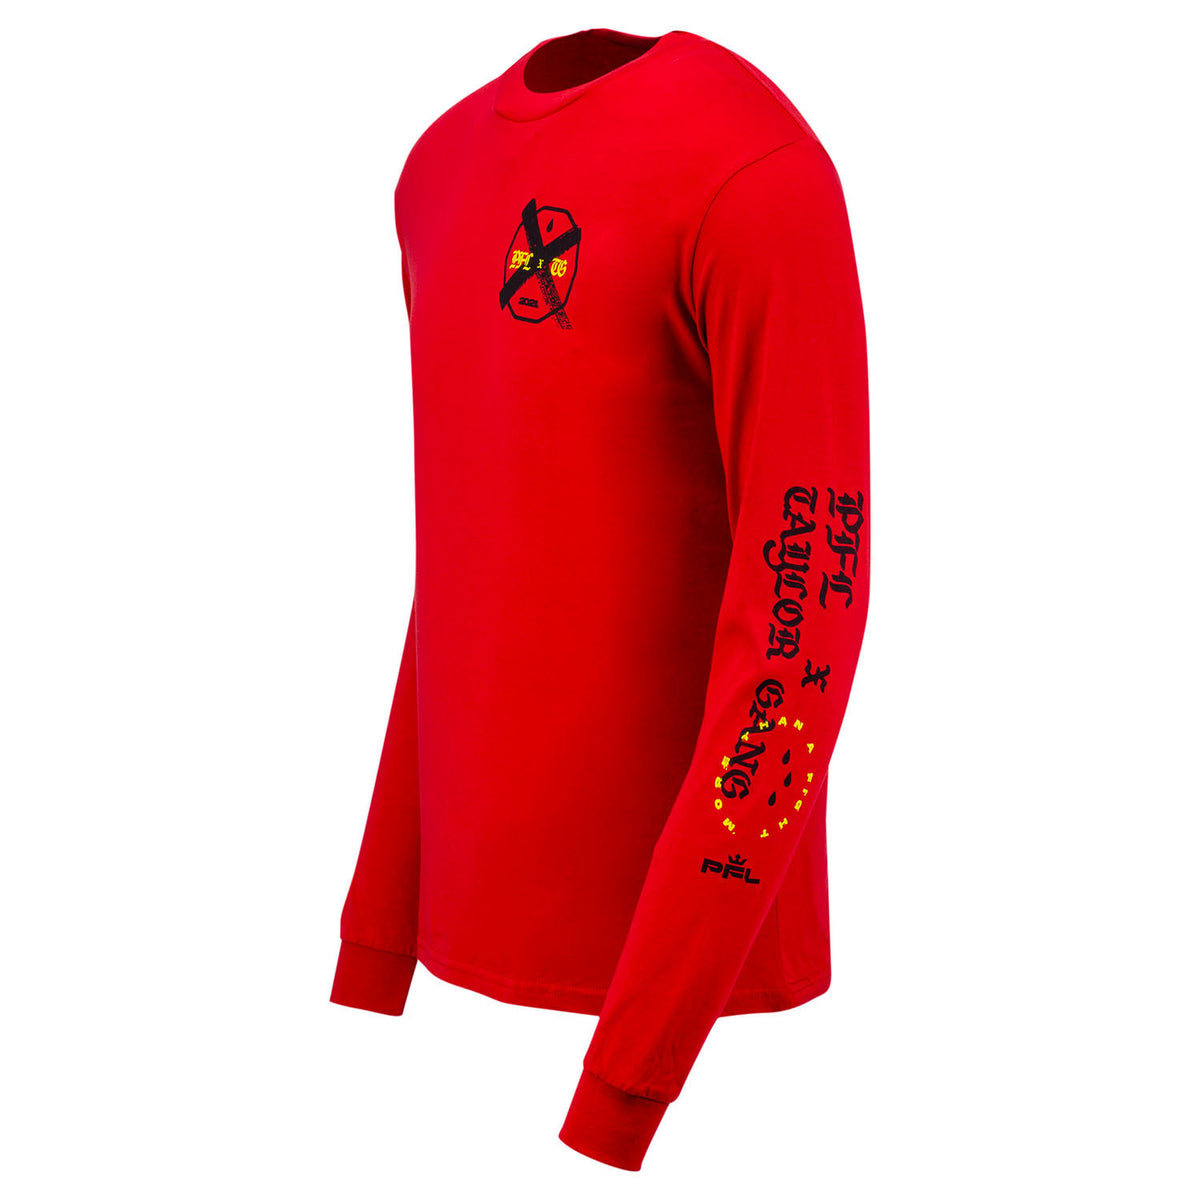 Taylor Gang x PFL “Step Into The Cage” Long-Sleeve in Red - Side View